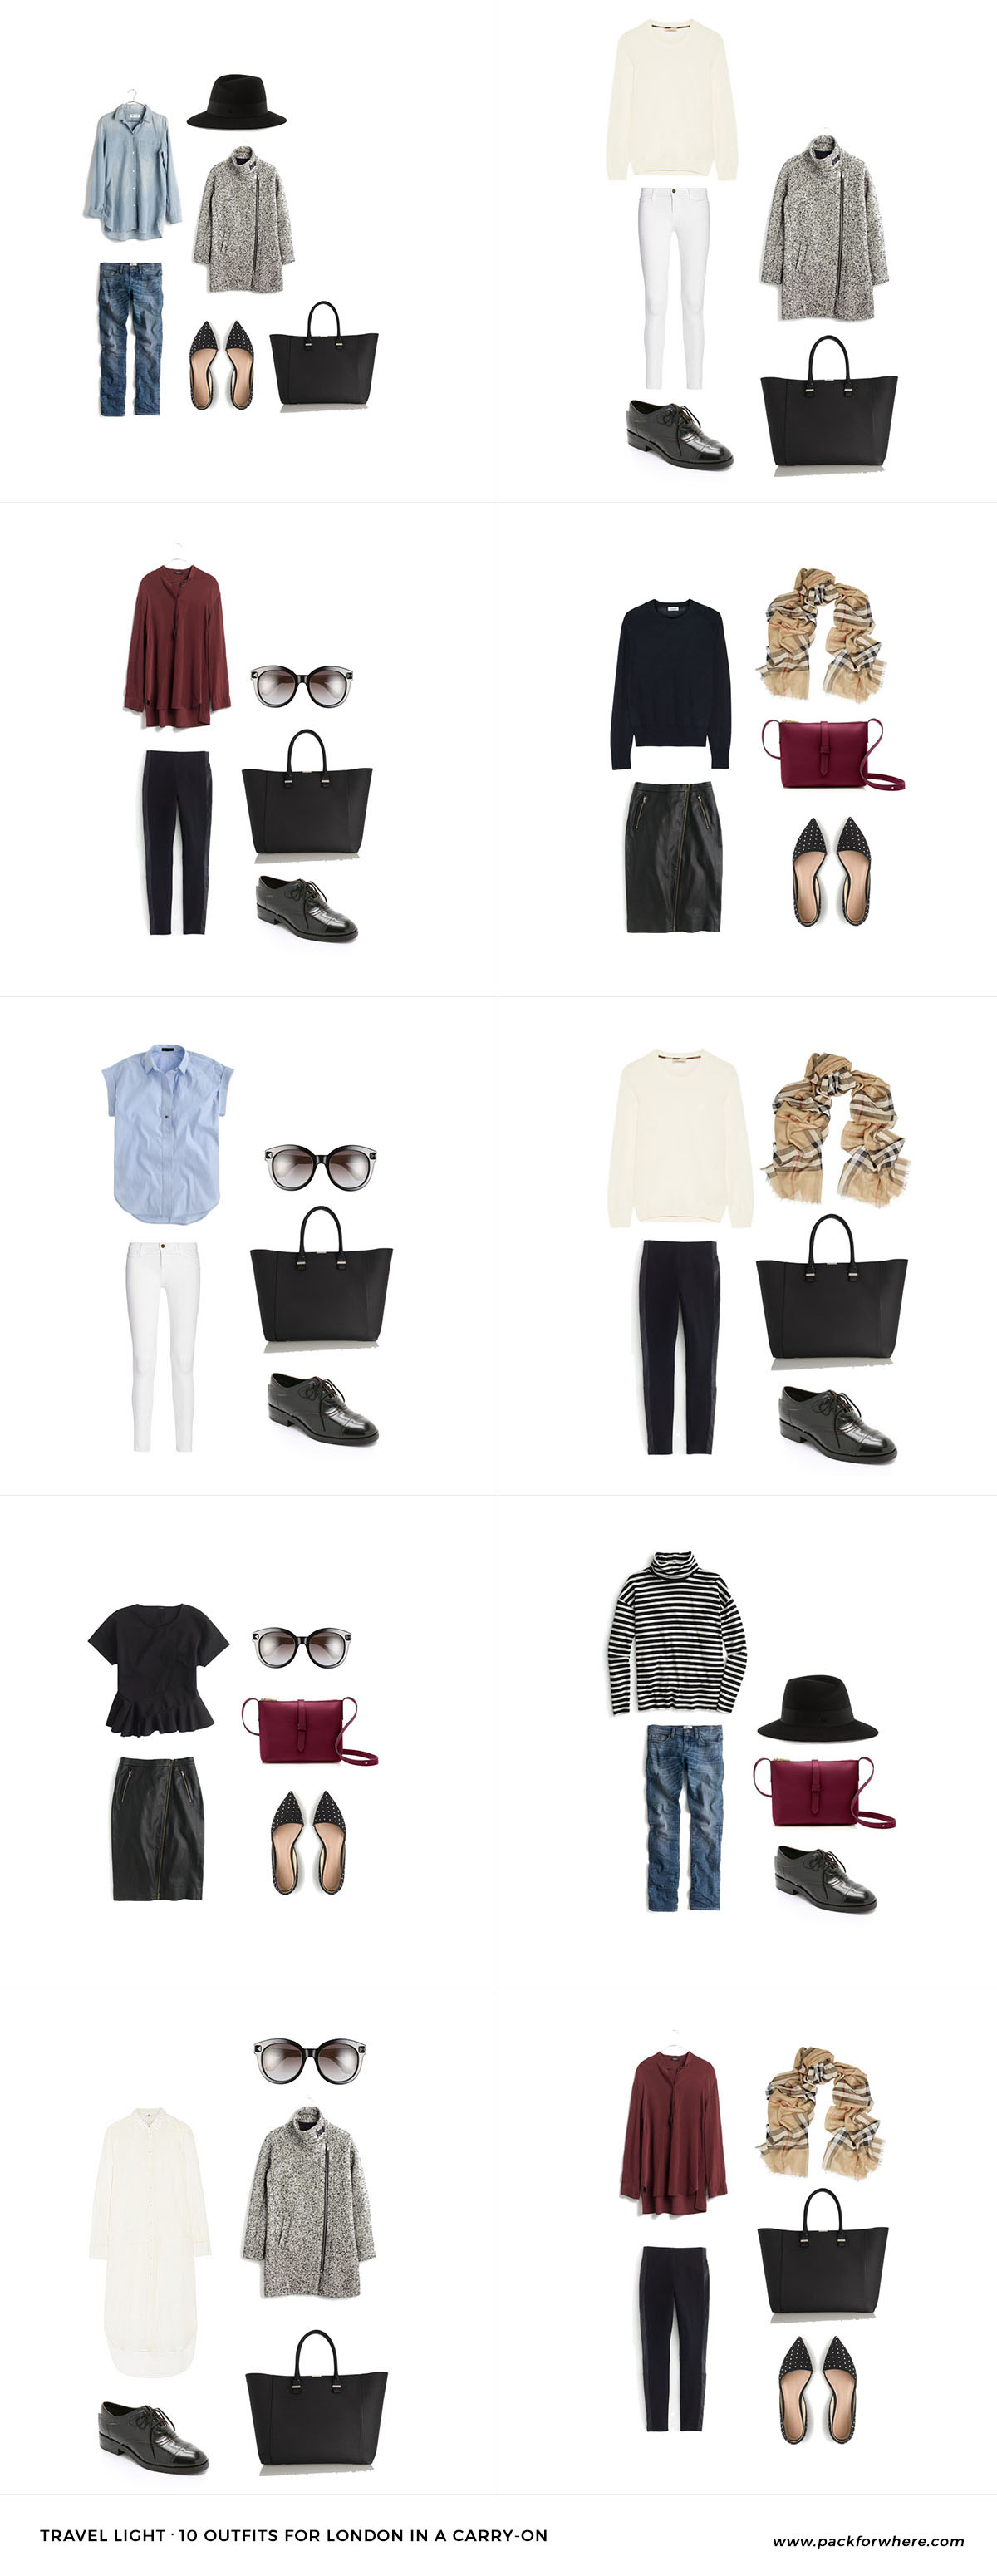 What to wear in London, Packing list includes 20 items, 10+ outfits, in 1 carryon.